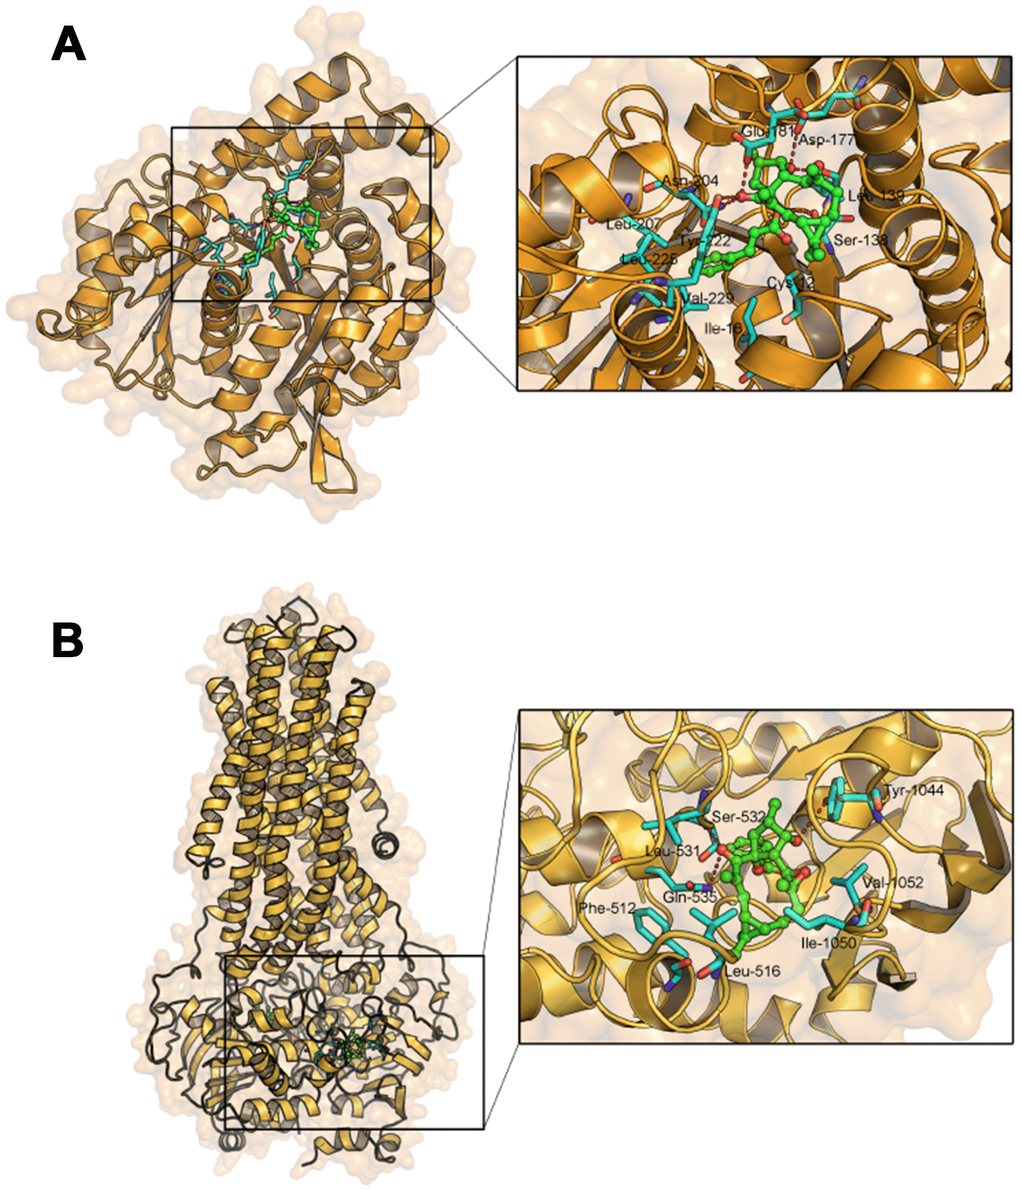 Molecular docking analysis of EM-E-11-4 to the activity cavity of TUBB3 (A) and P-gp (B).